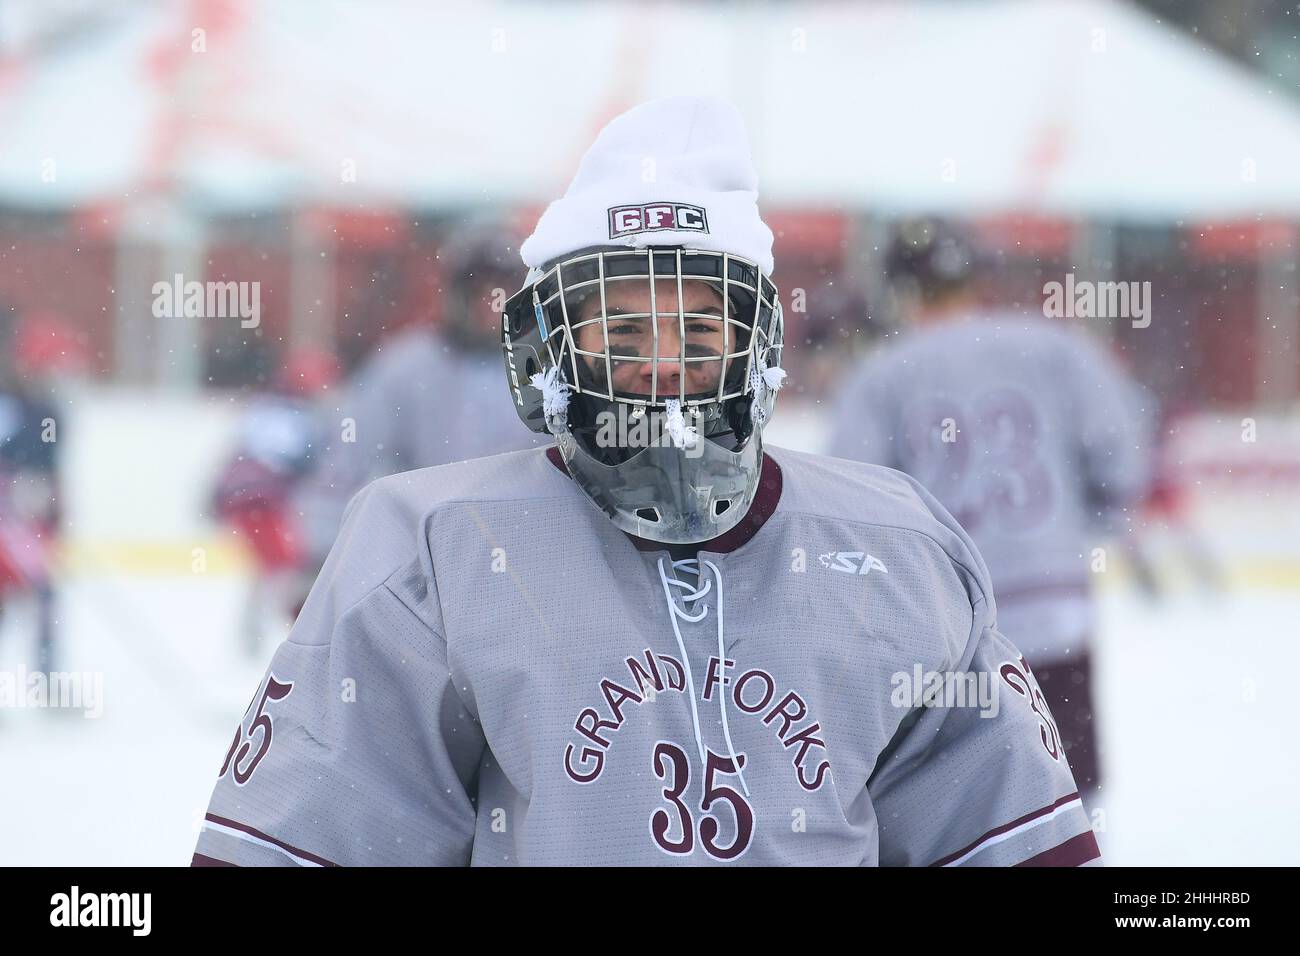 Grand Forks Central Knights goaltender Jaxon Washburn (35) skates in warmups before there game at the 3rd annual Hockey Day North Dakota outdoor hockey event in Jamestown, ND. Youth, high school and college hockey teams from around North Dakota competed over two days. By Russell Hons/CSM Stock Photo